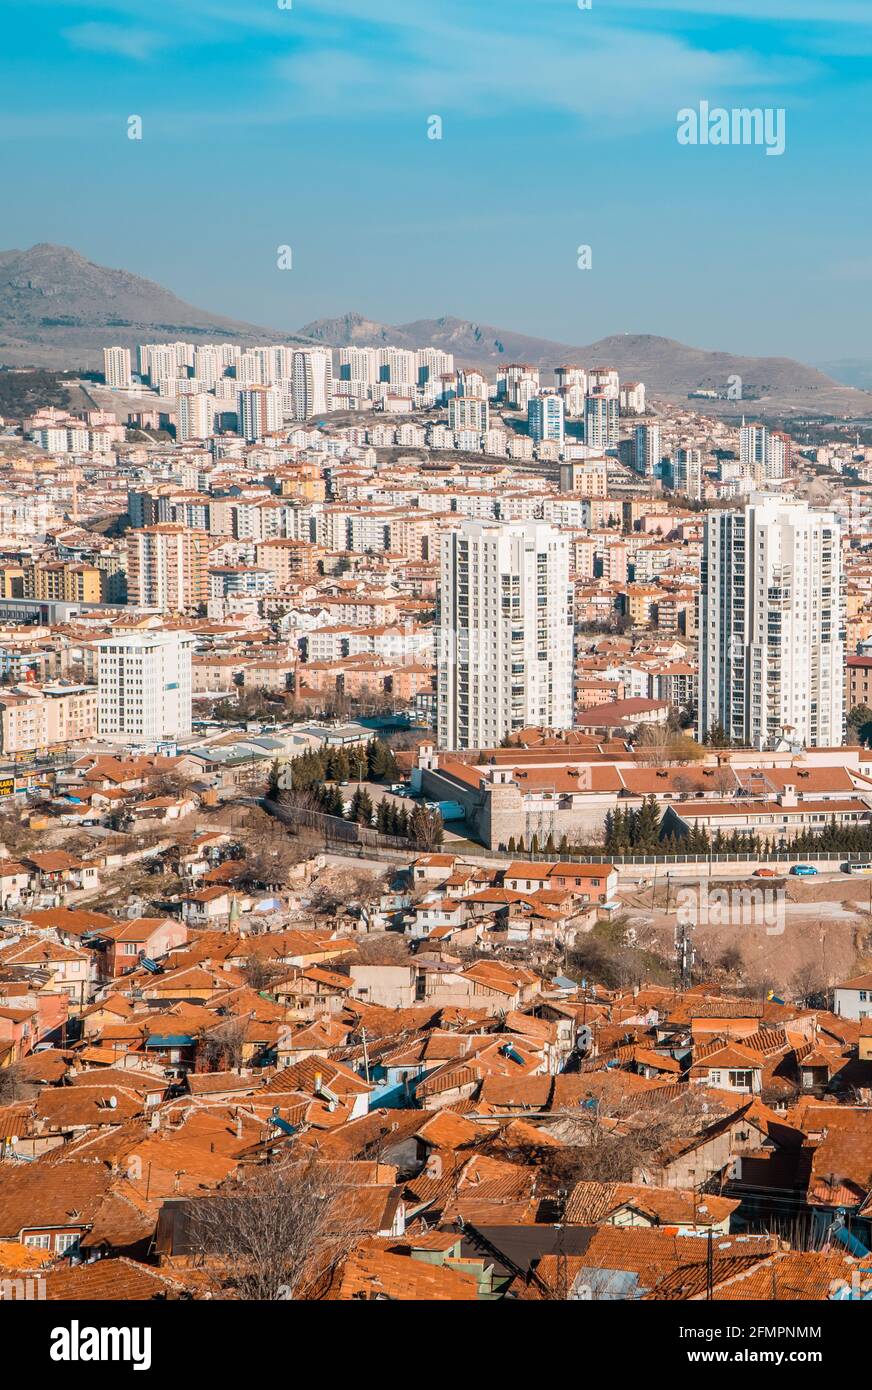 Ankara, Turkey - March 12, 2021 - aerial view of the city of Ankara with informal houses and modern residential areas seen from Ankara Castle Stock Photo